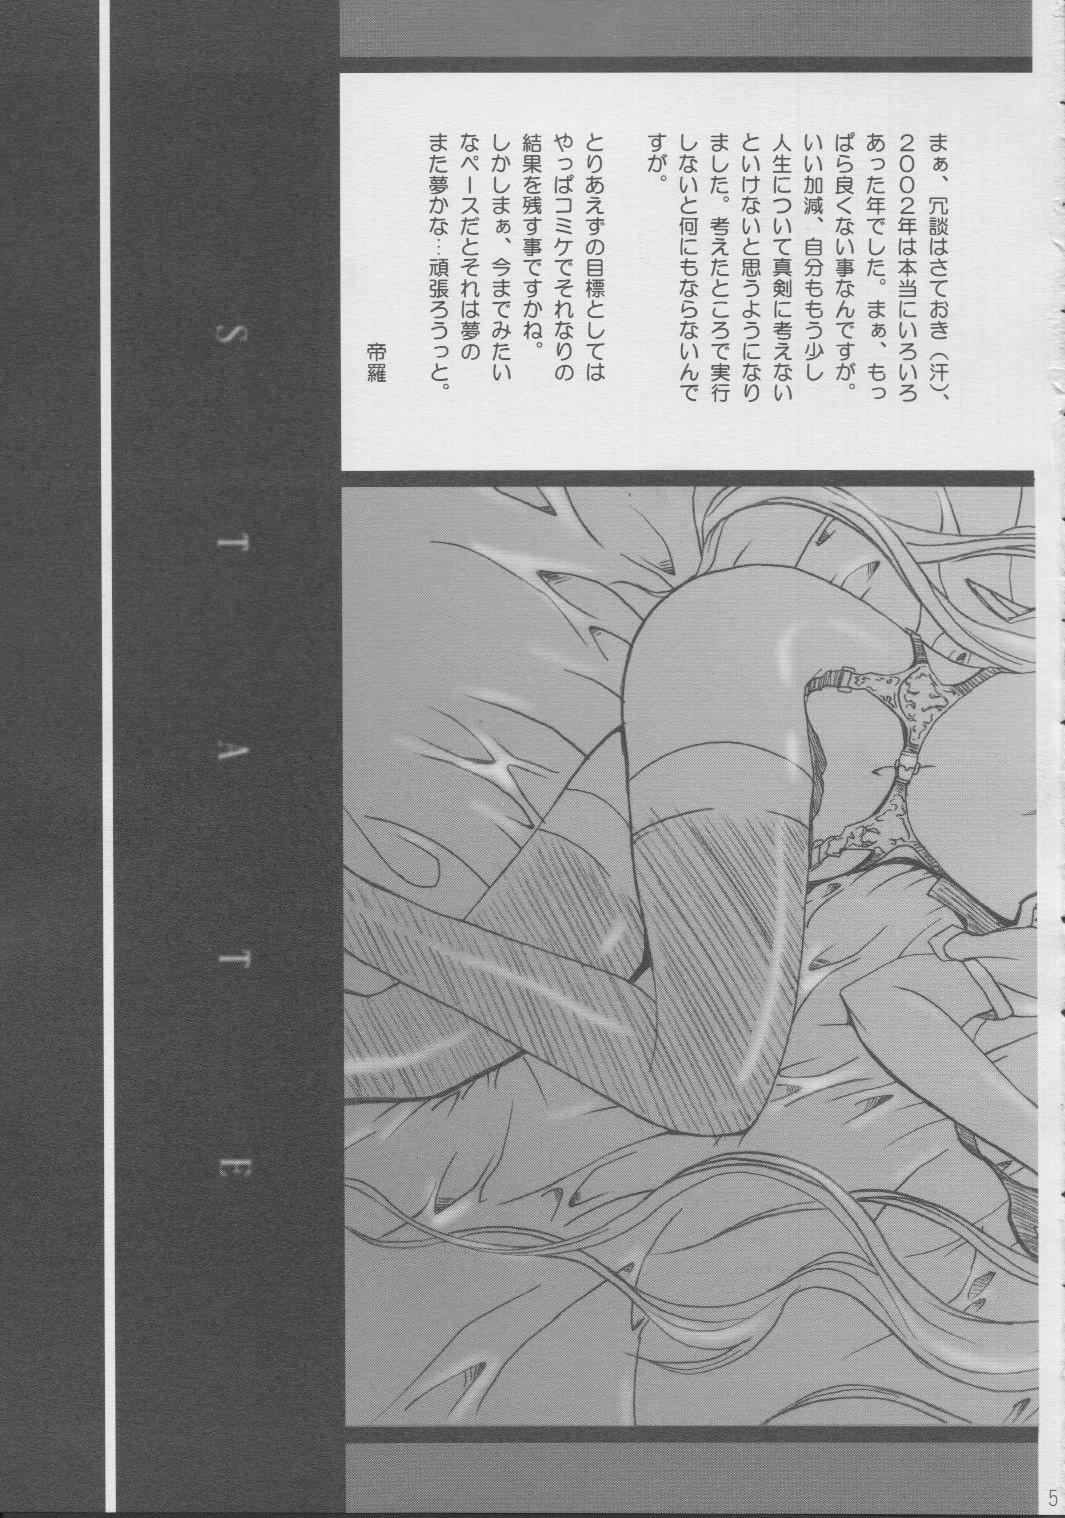 Blows SOLID STATE 5 - Martian successor nadesico Free Blowjobs - Page 4